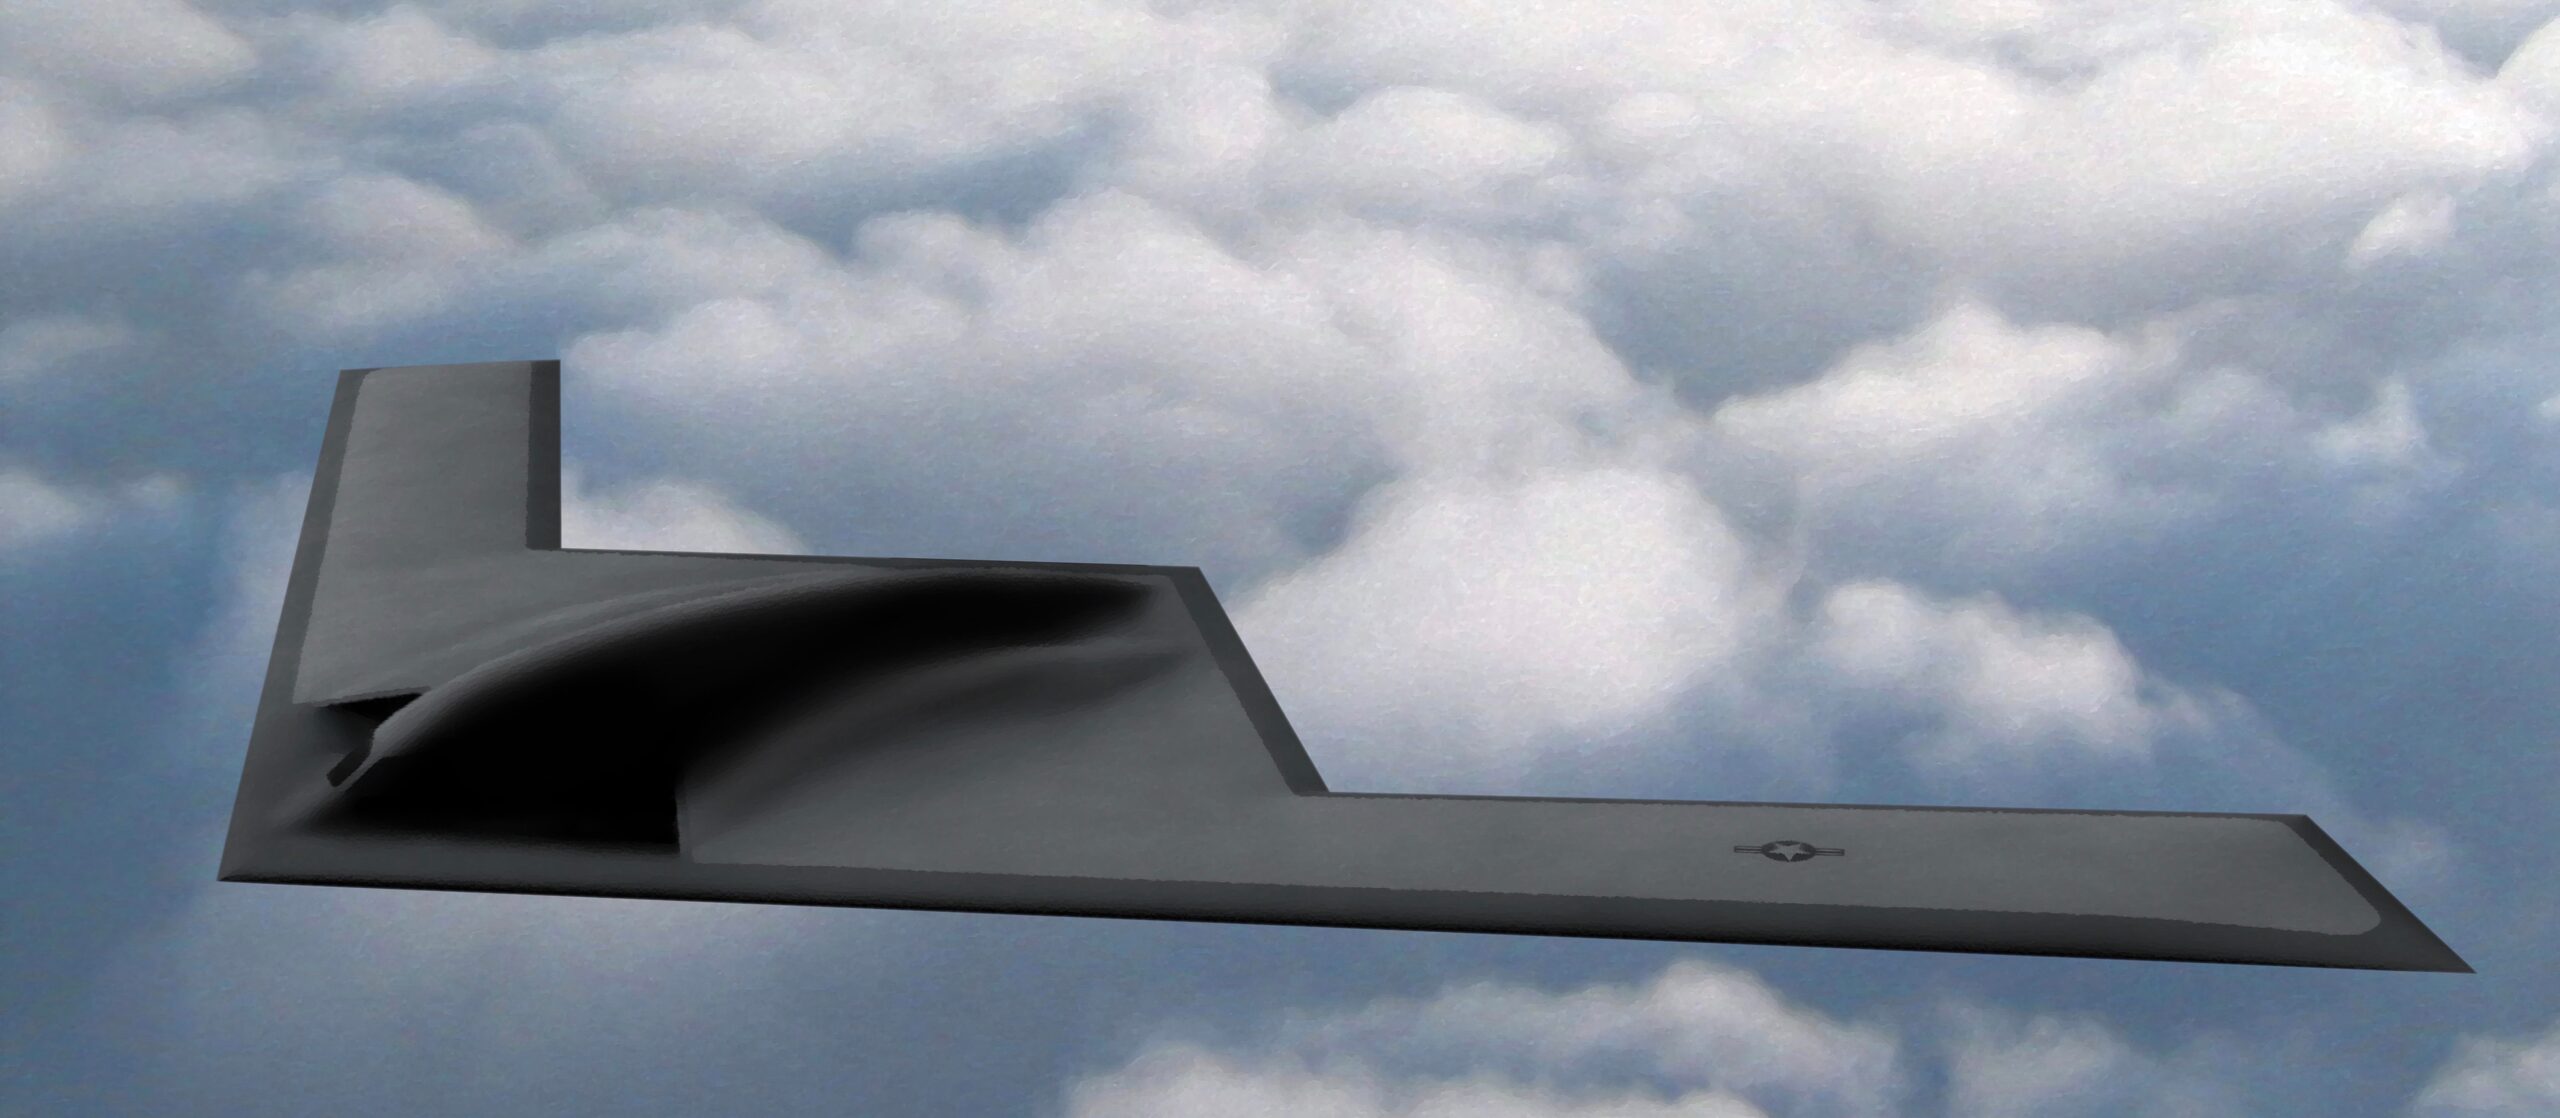 What Will New Bomber Squadrons Mean For Air Force? 75 More B-21s?